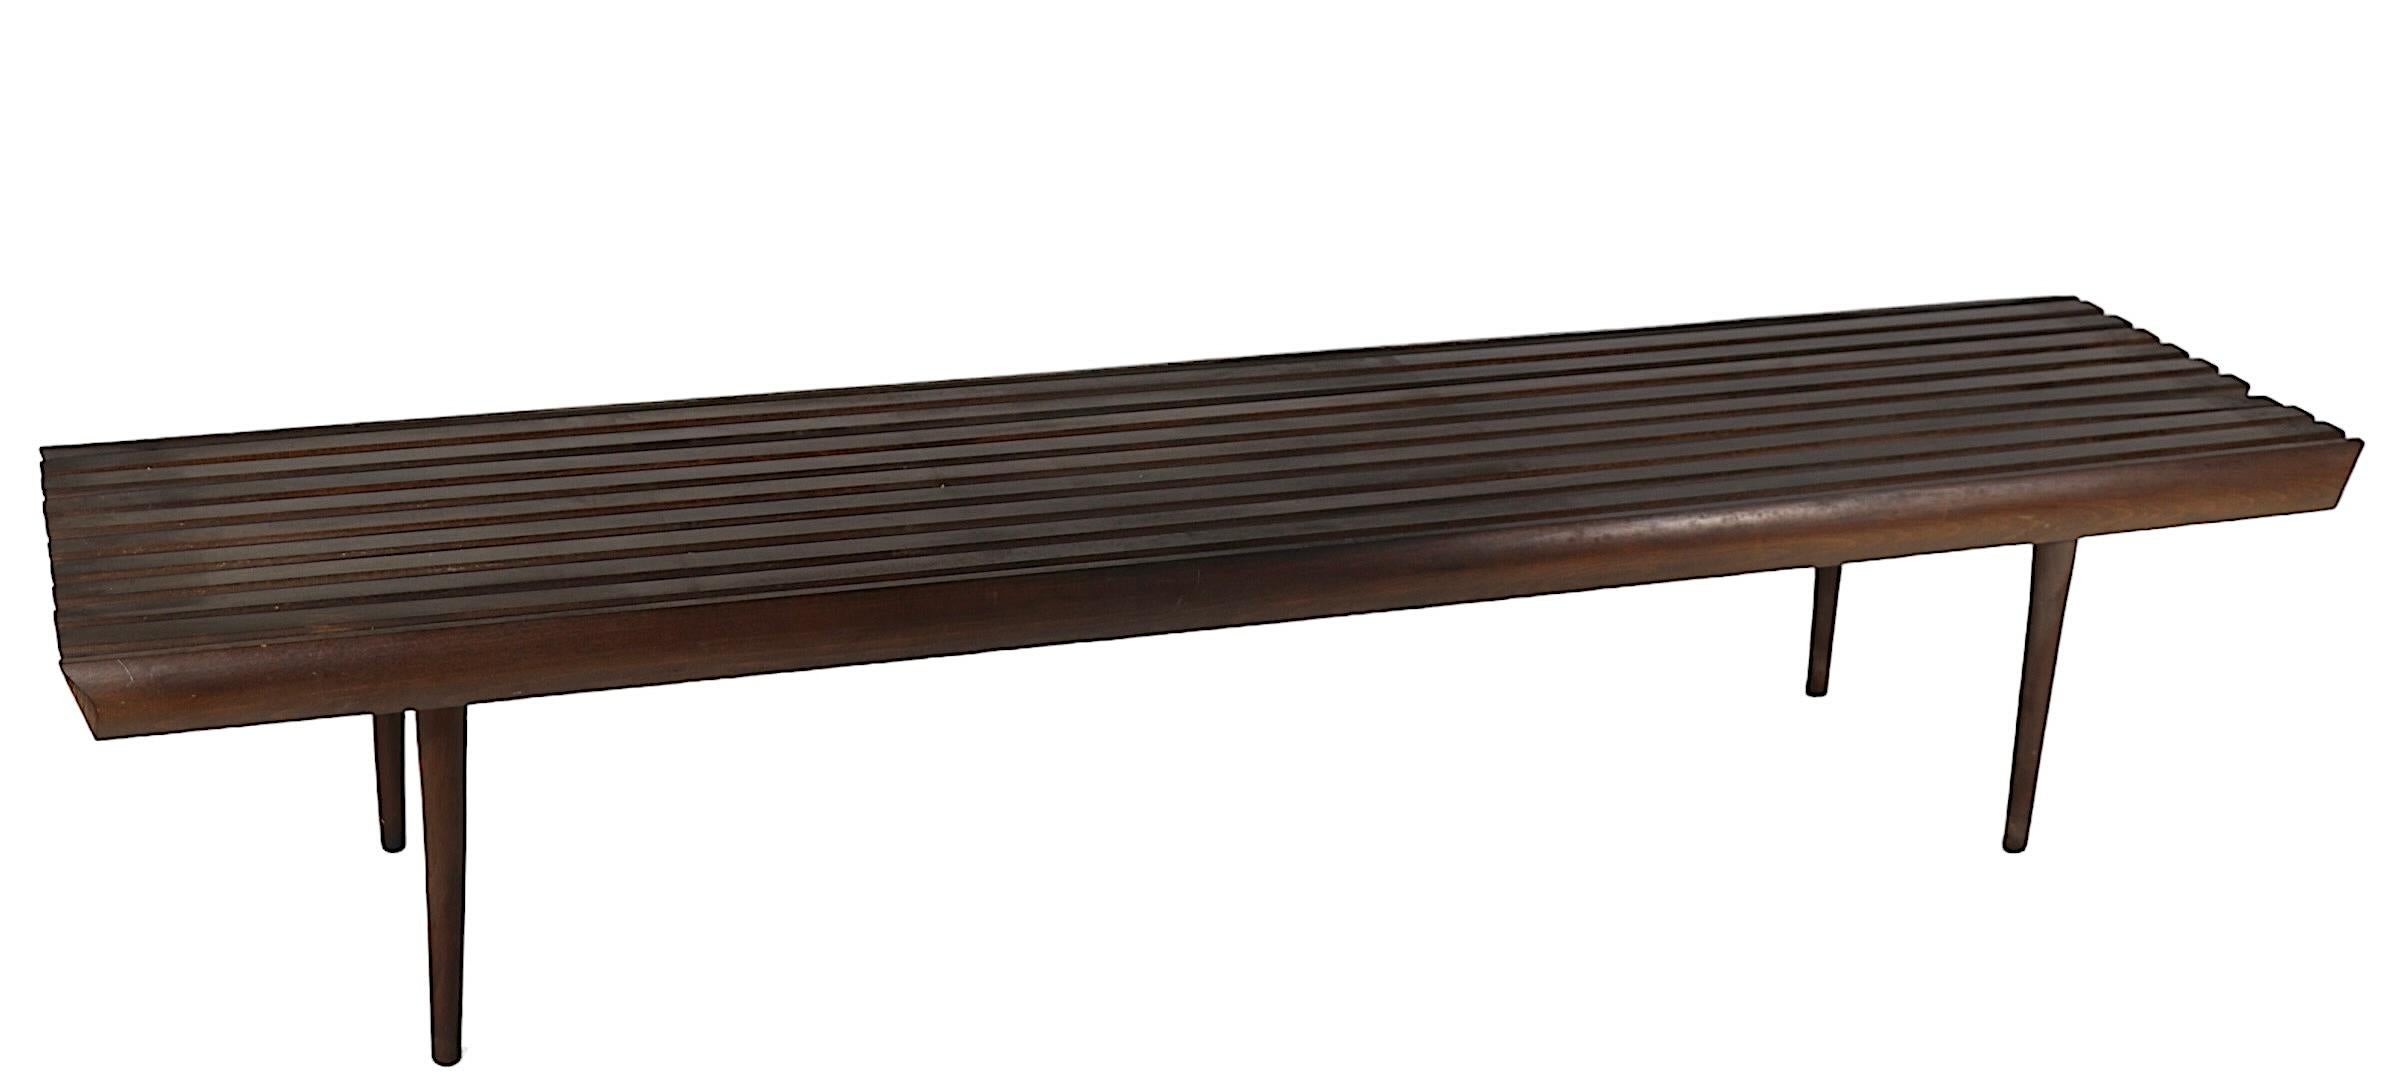 Mid Century Slatted Top Bench Style Coffee Table after Nelson c 1950/1960's In Good Condition For Sale In New York, NY